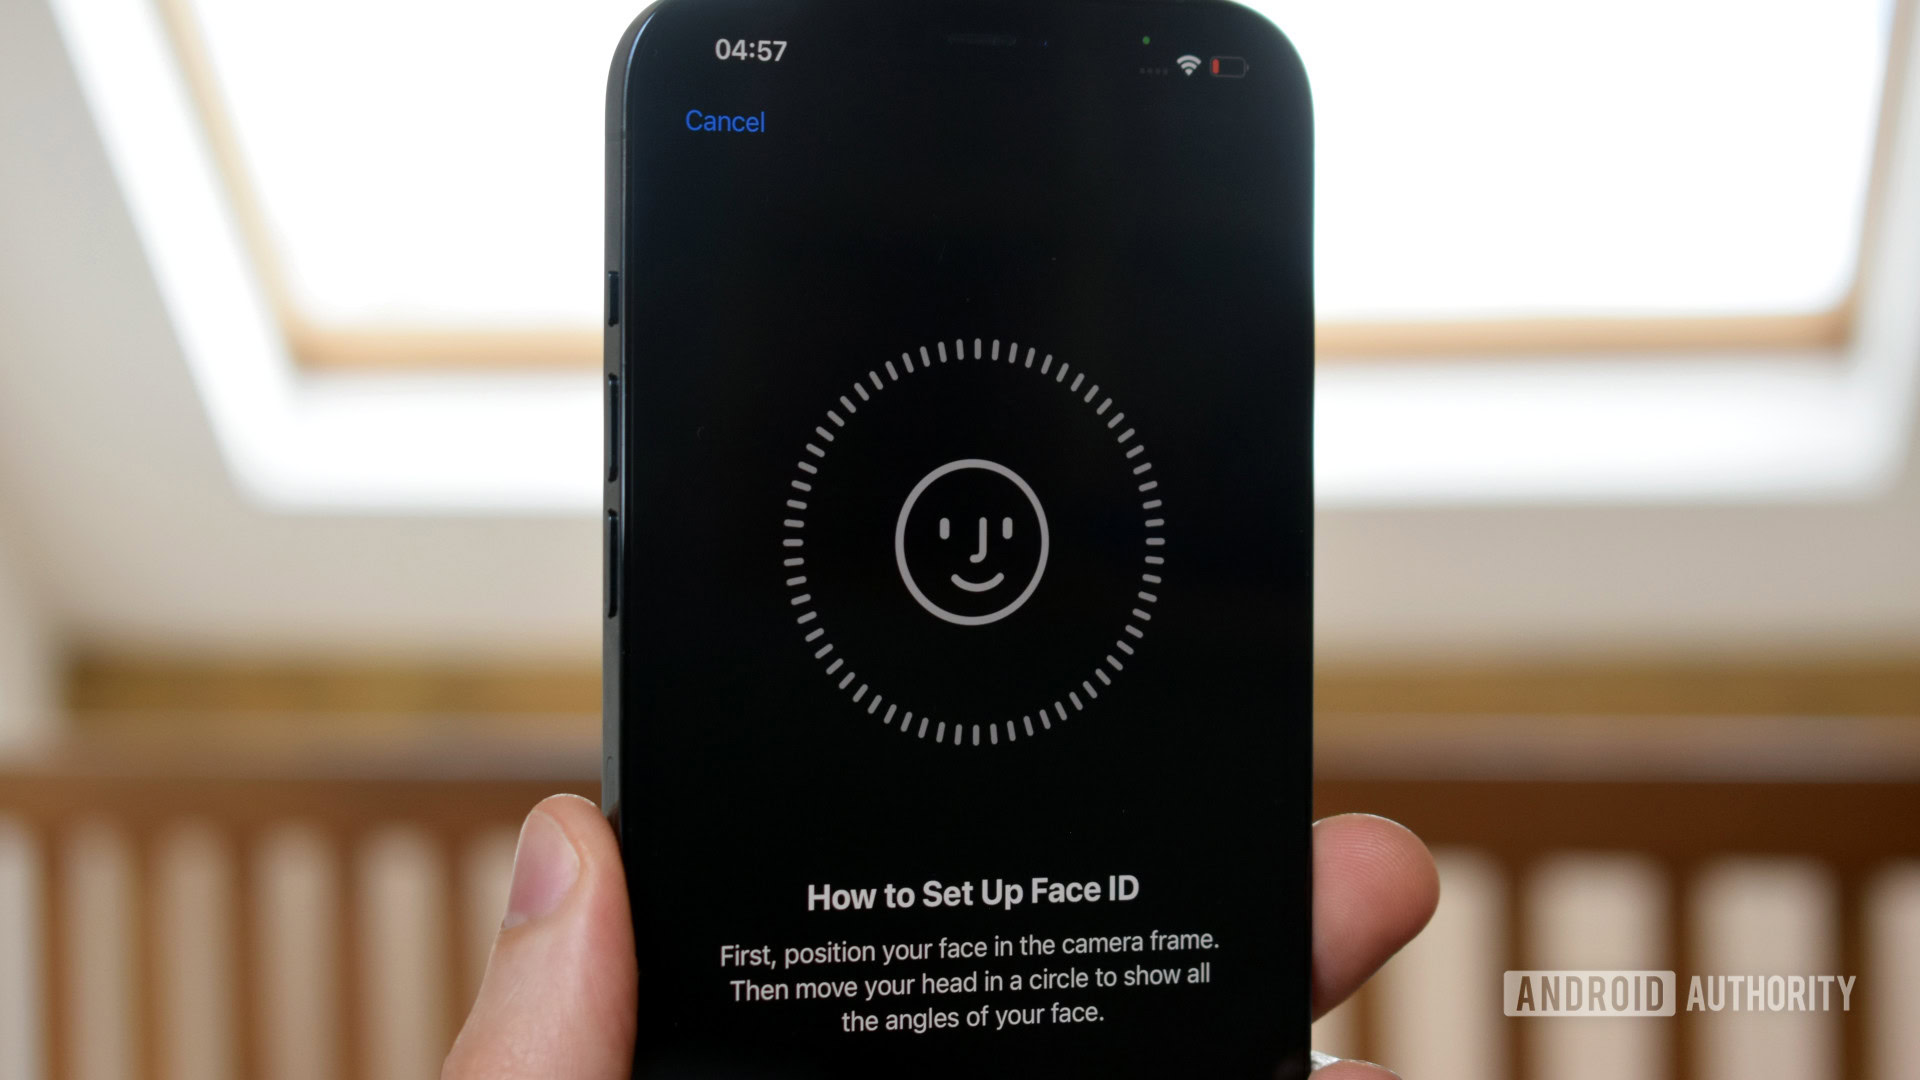 What is Face ID? Apple's privacy feature explained